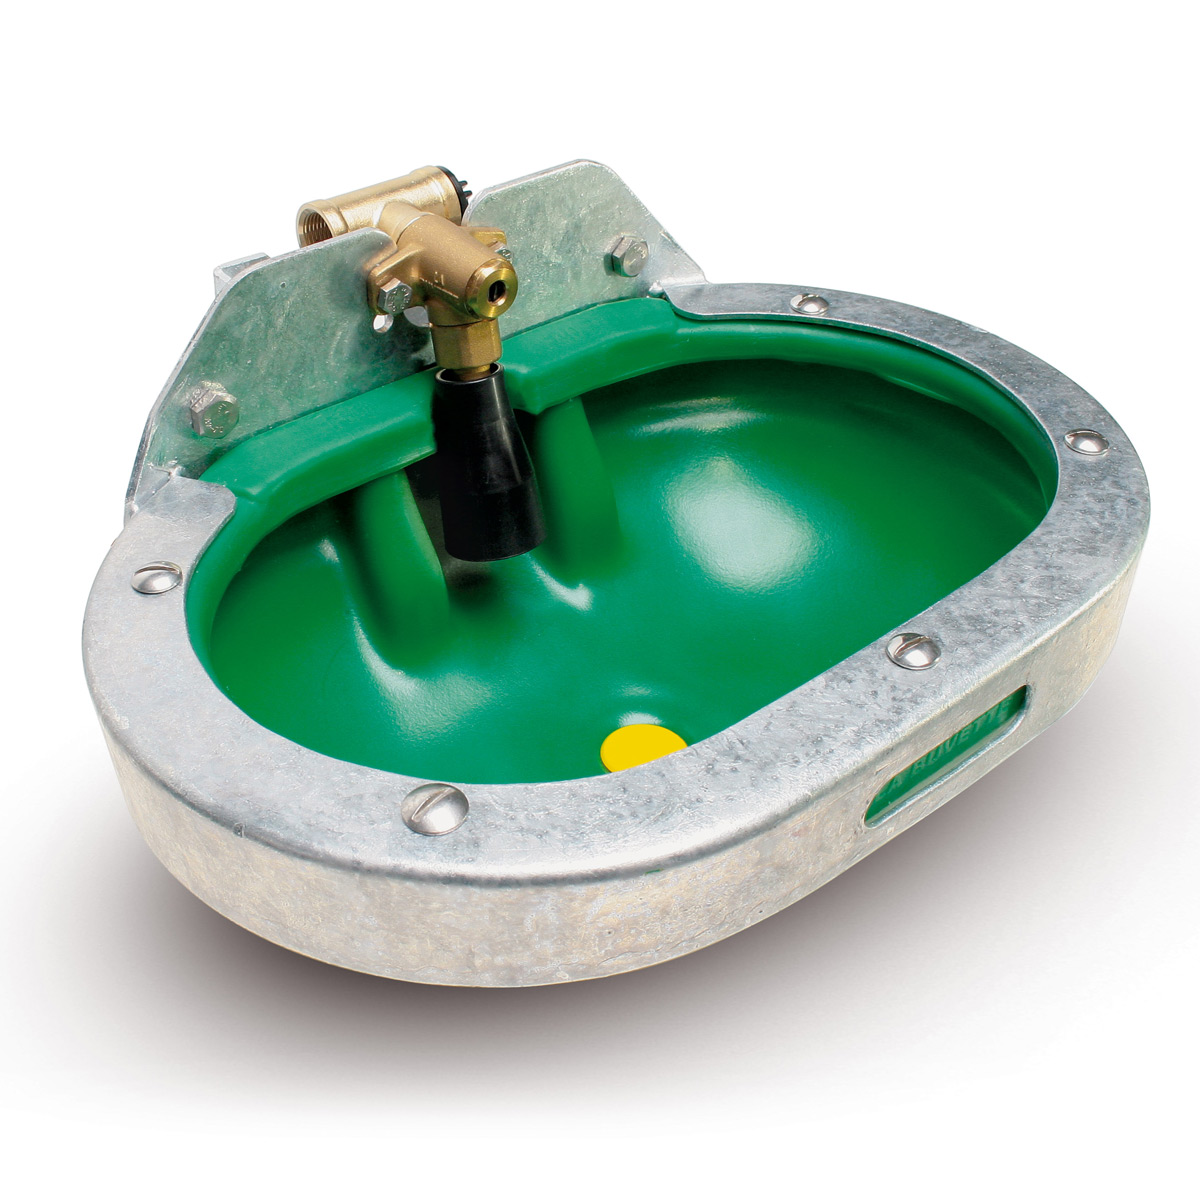 F40 Non-spill HDPE drinker with full metal protection